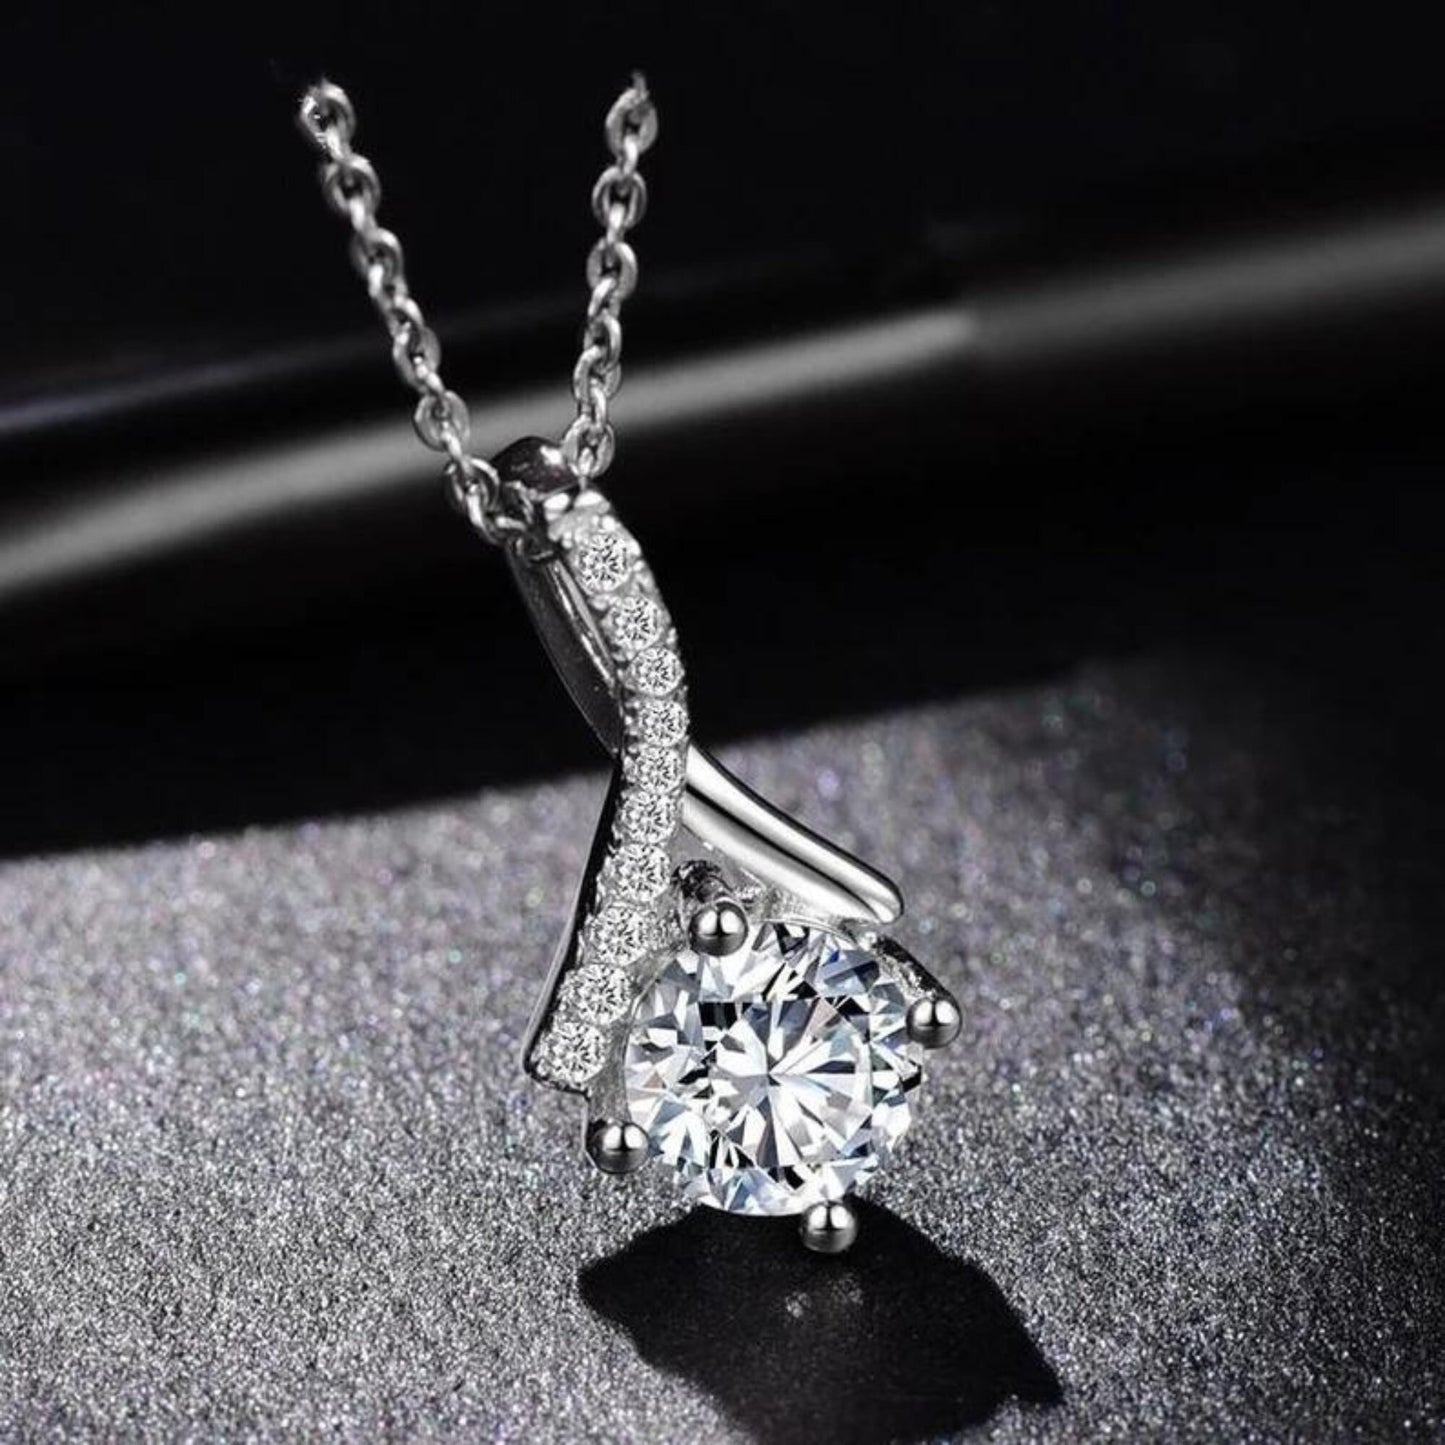 Best Gift For Daughter From Mom - You are my pride and joy - Alluring Beauty Necklace #e19